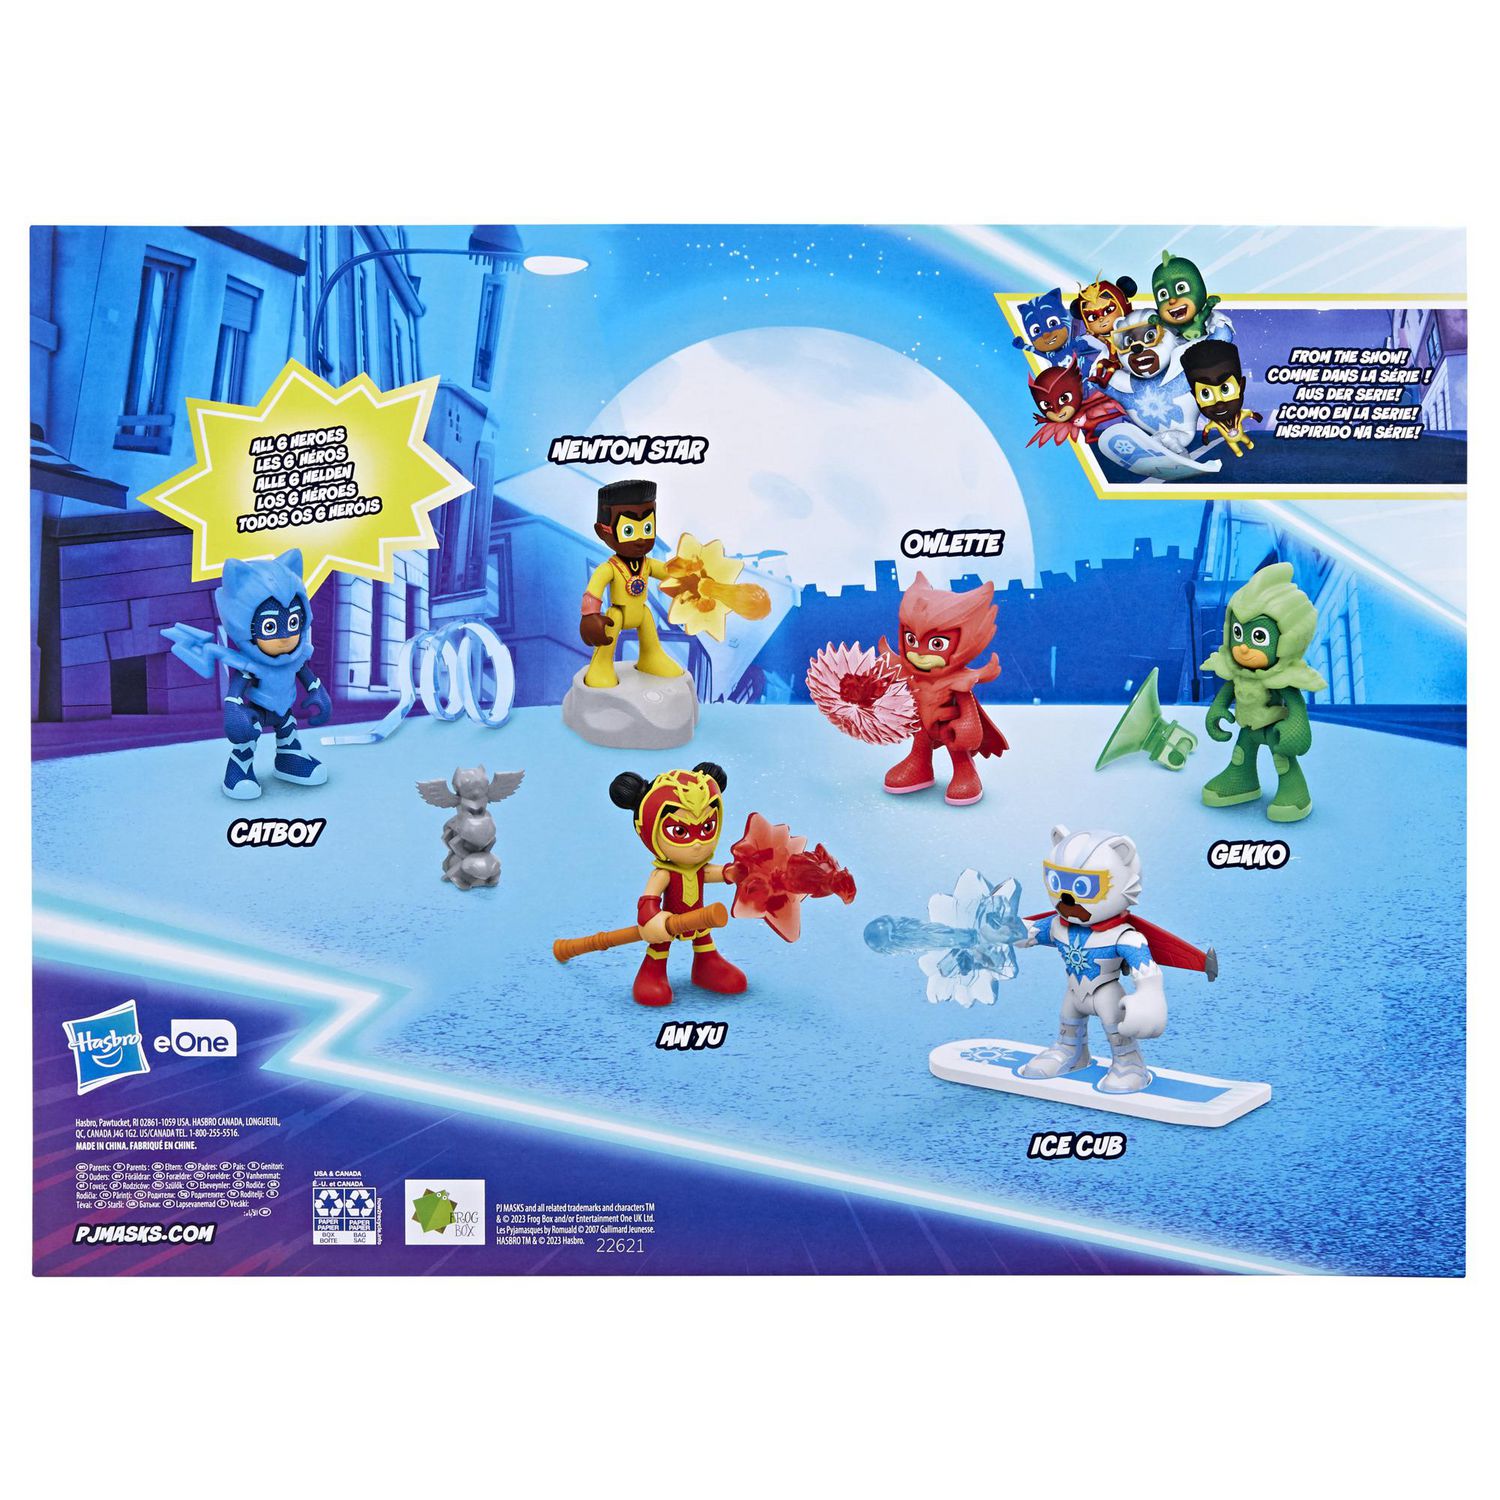 PJ Masks - Need some gift inspo for a PJ Masks Super Fan? Check out these  Super Savings! Up to 30% off select PJ Masks Toys ✨ Shop now:  go.hasb.ro/pjmasksdeals